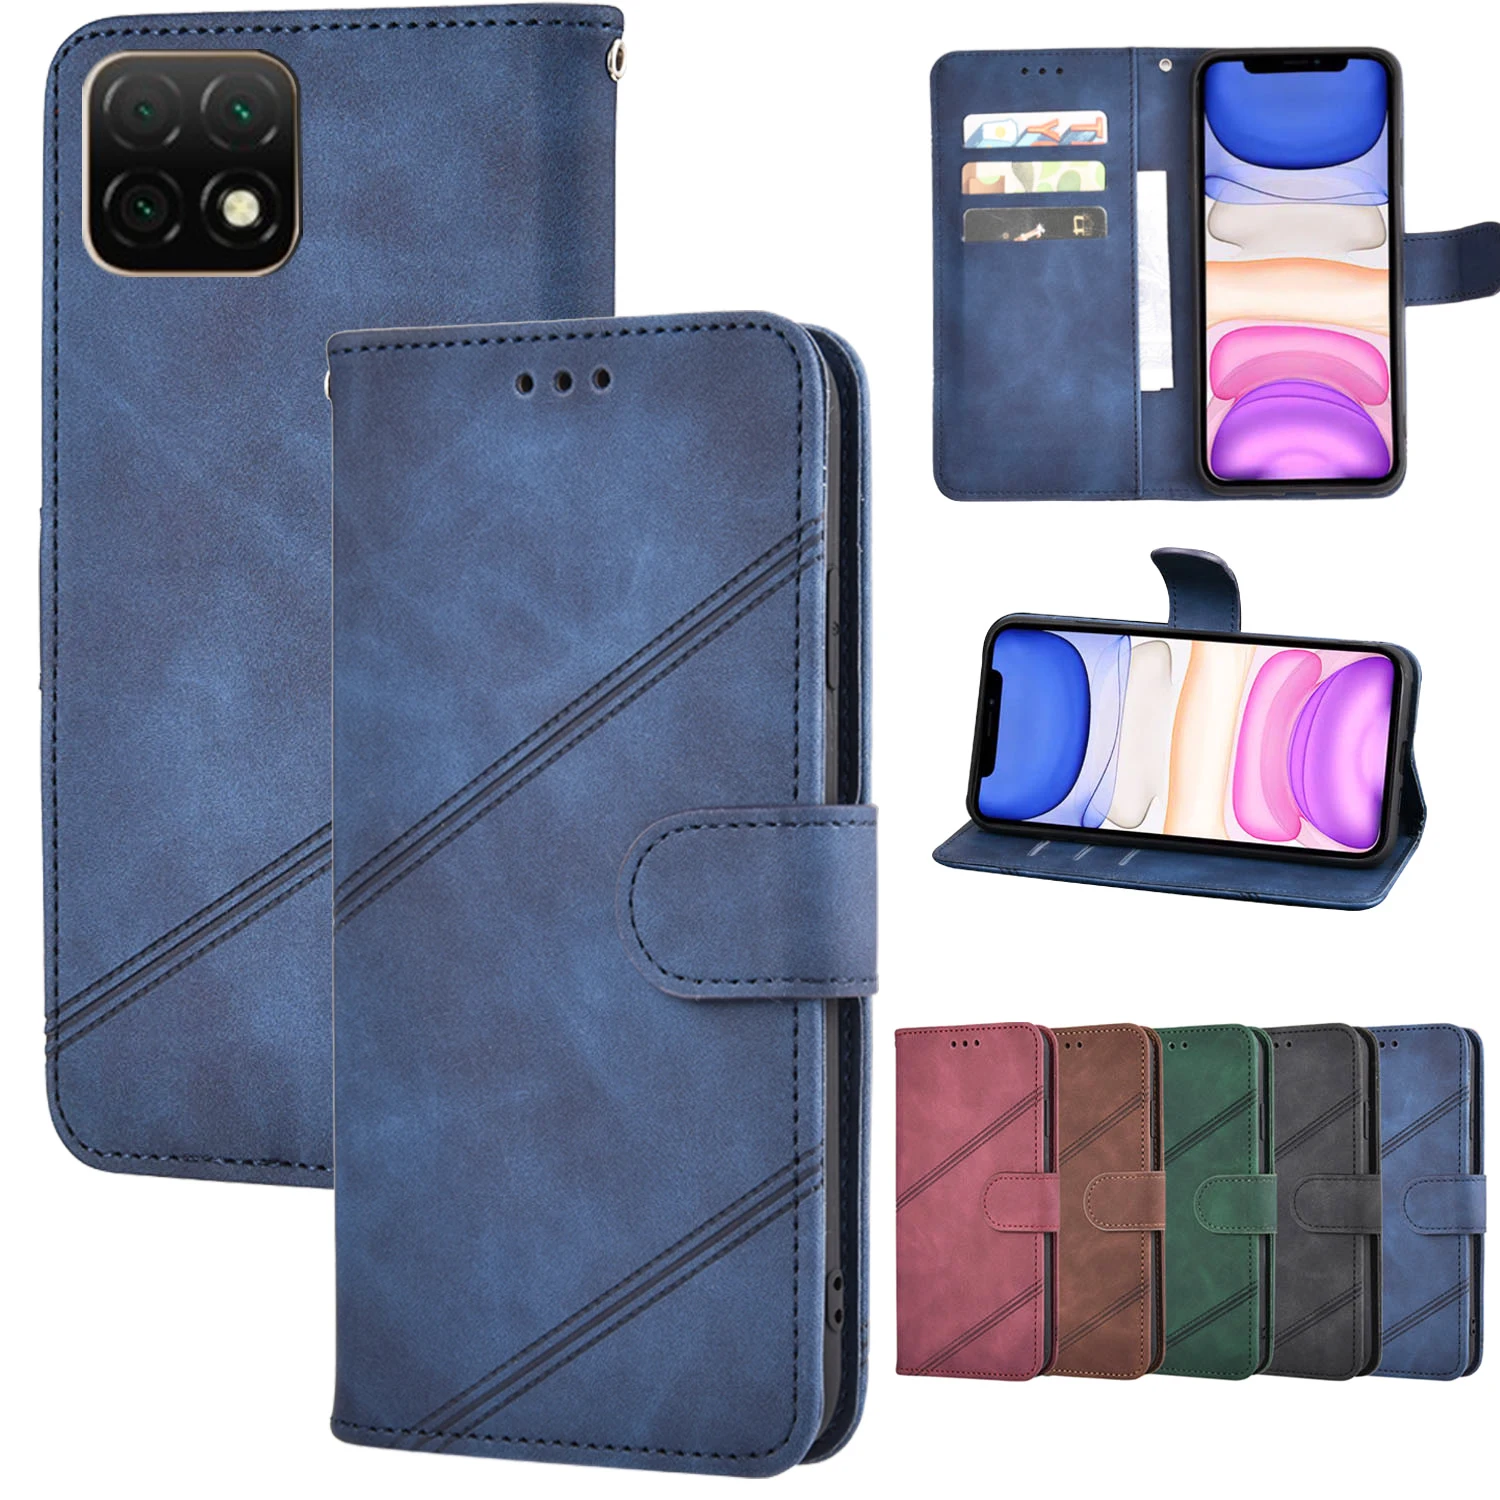 

Flip Leather Wallet Case For Huawei Nova Y60 Y 60 Card Slot Back Coque For Huawei Wukong-L29A Cover Funda Protective Bags